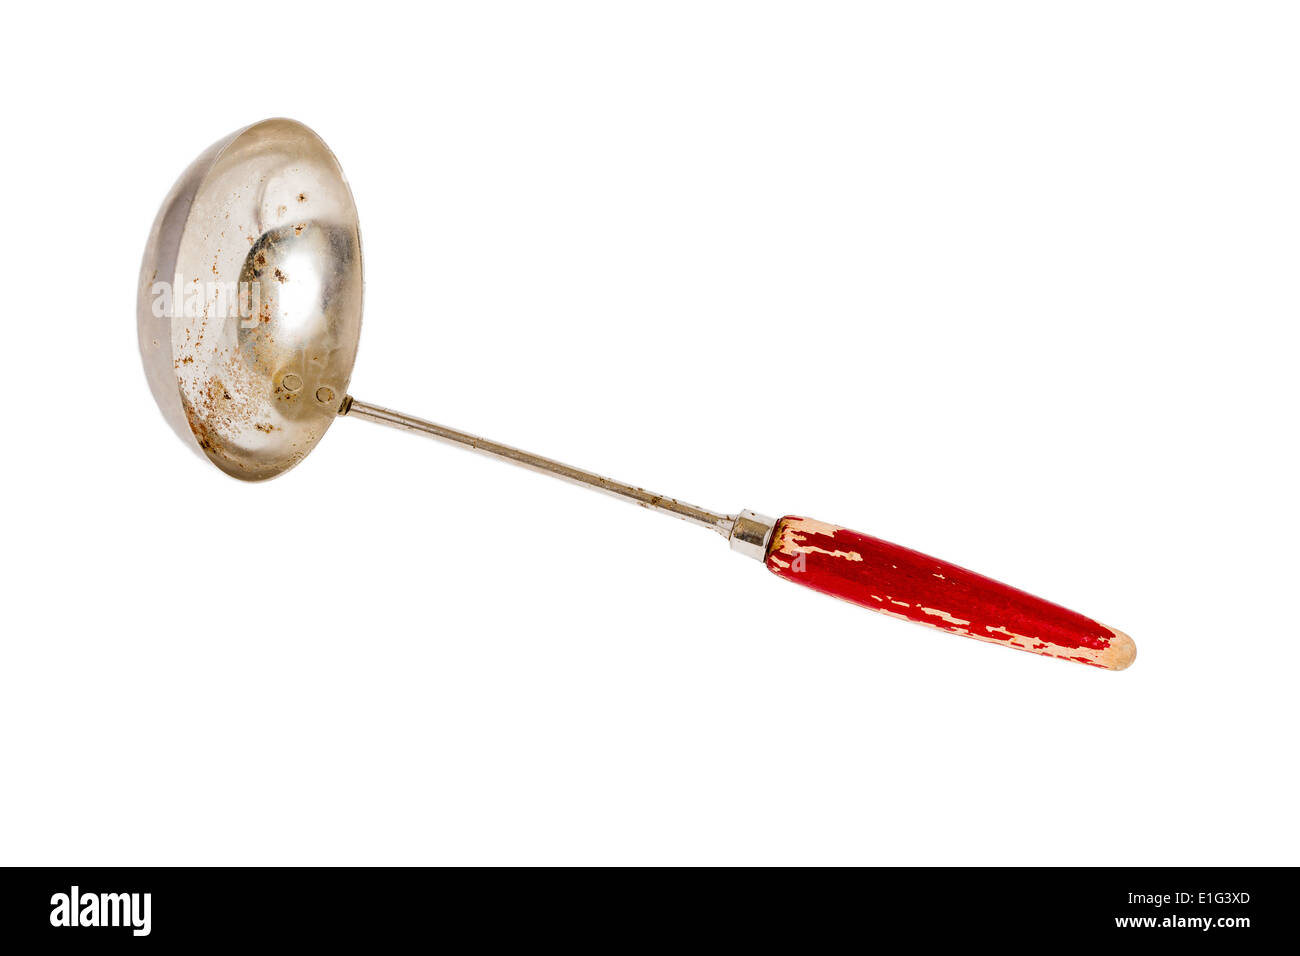 Antique ladle with a red wooden handle on a solid white background Stock Photo